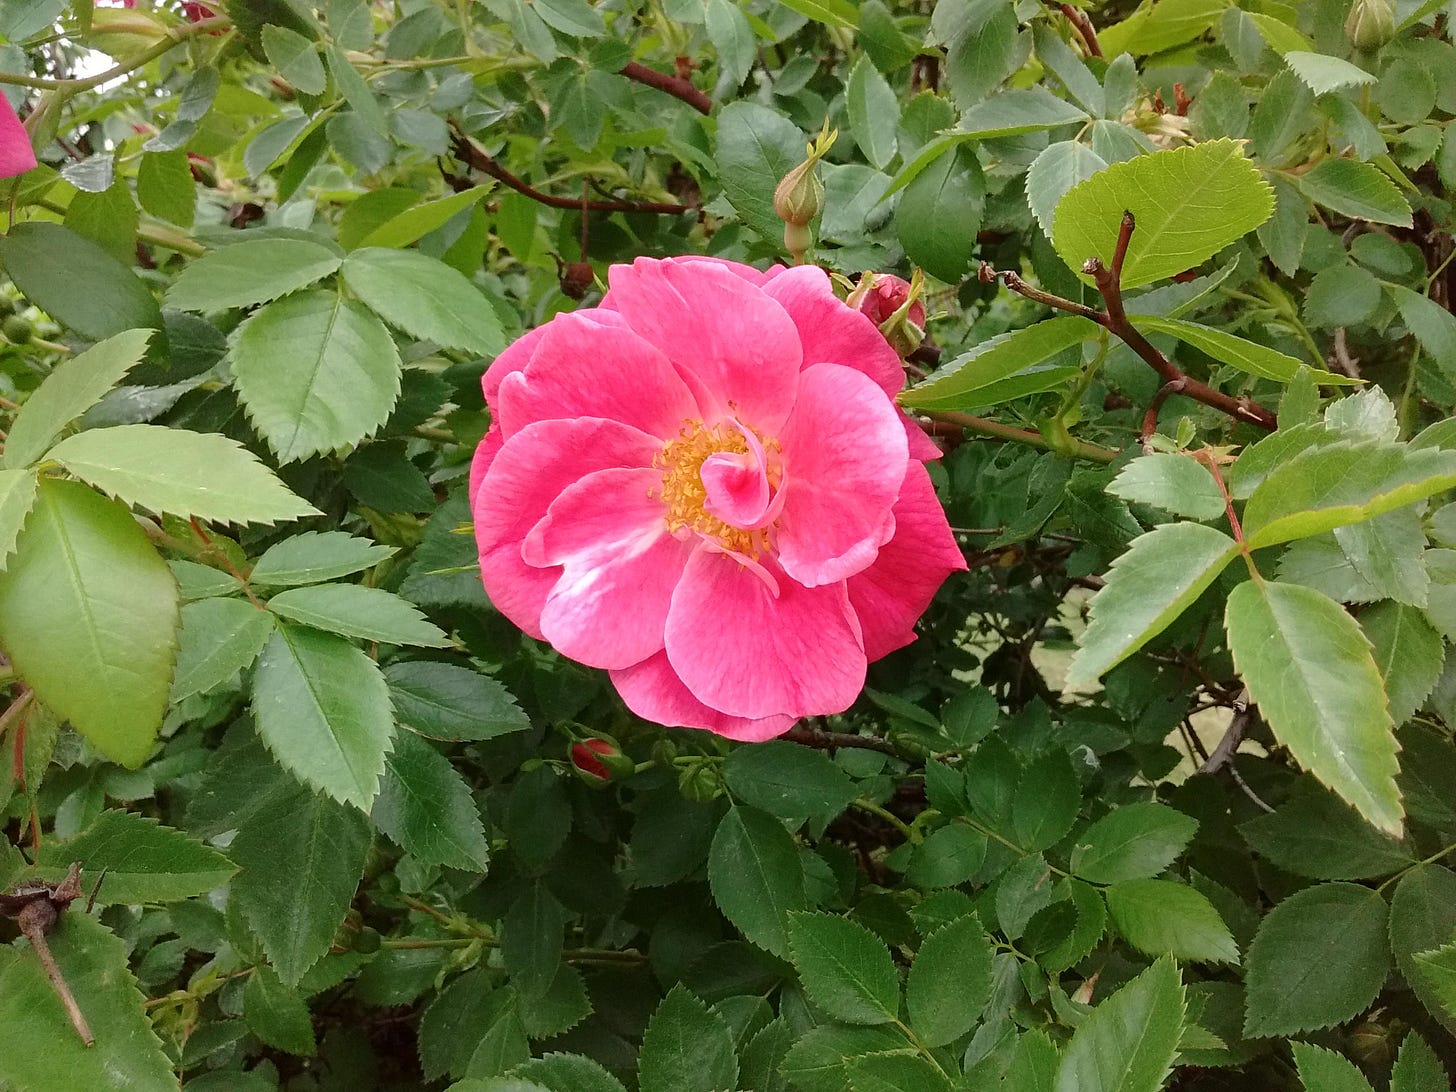 Pink wild rose against green foliage.